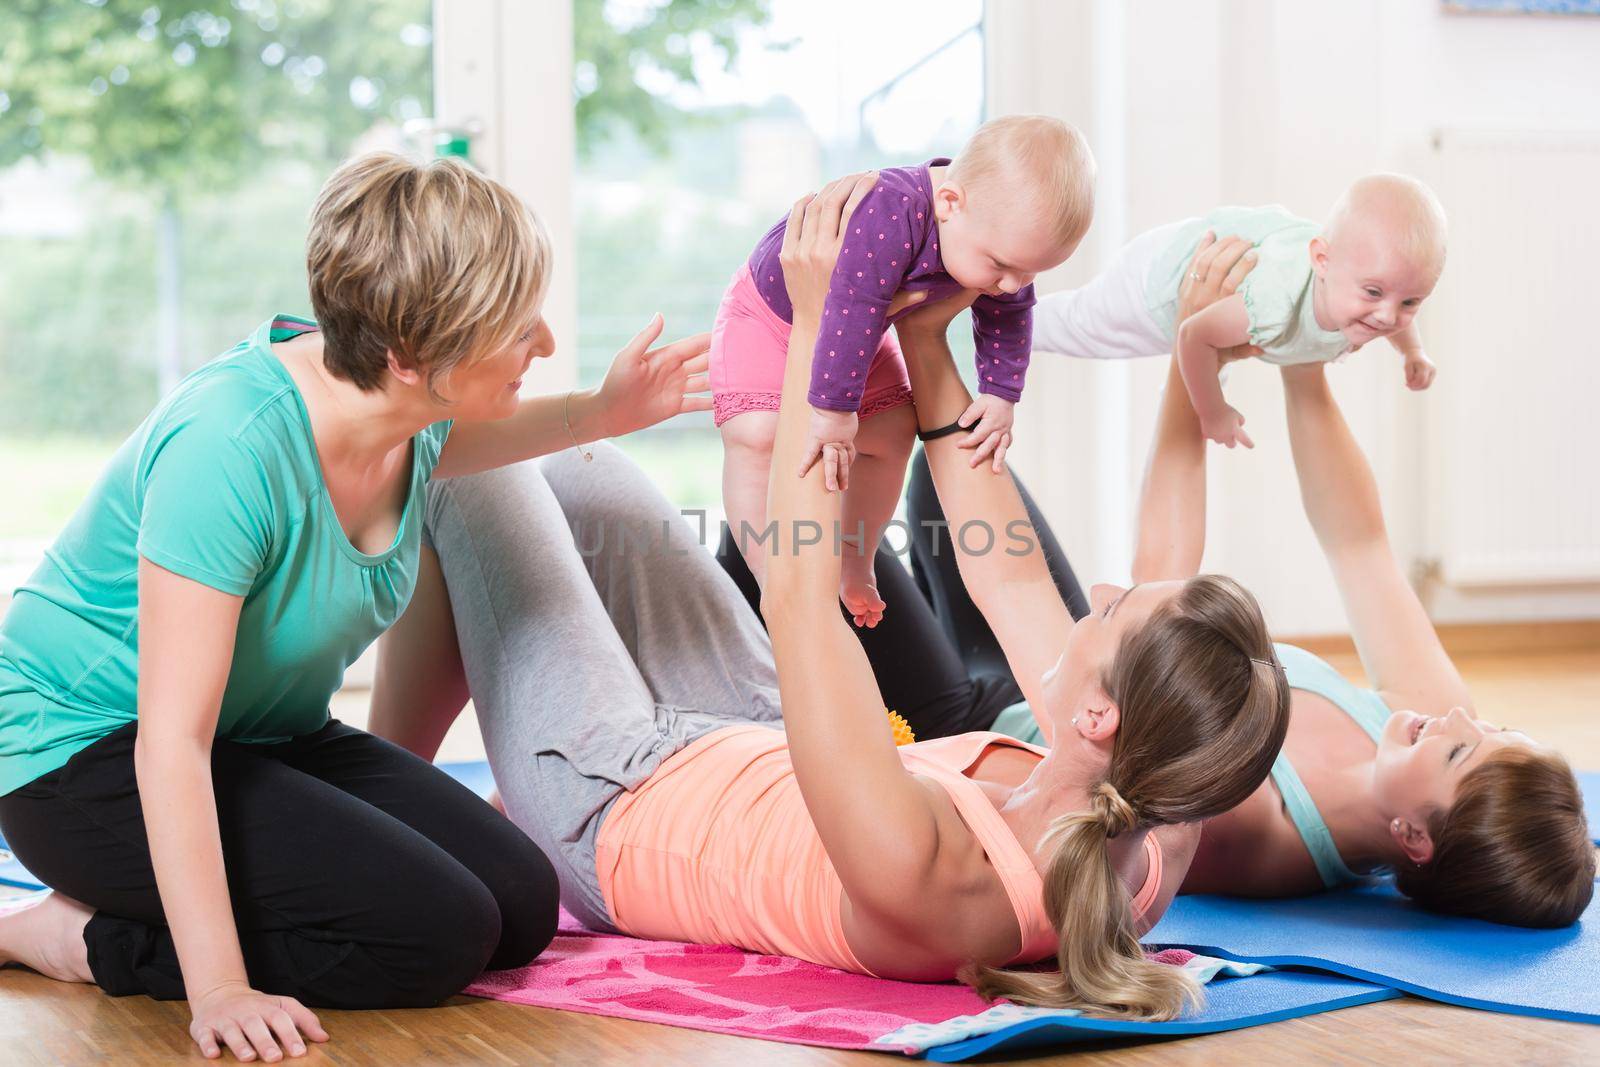 Women and their babies in mother-child gymnastic course by Kzenon